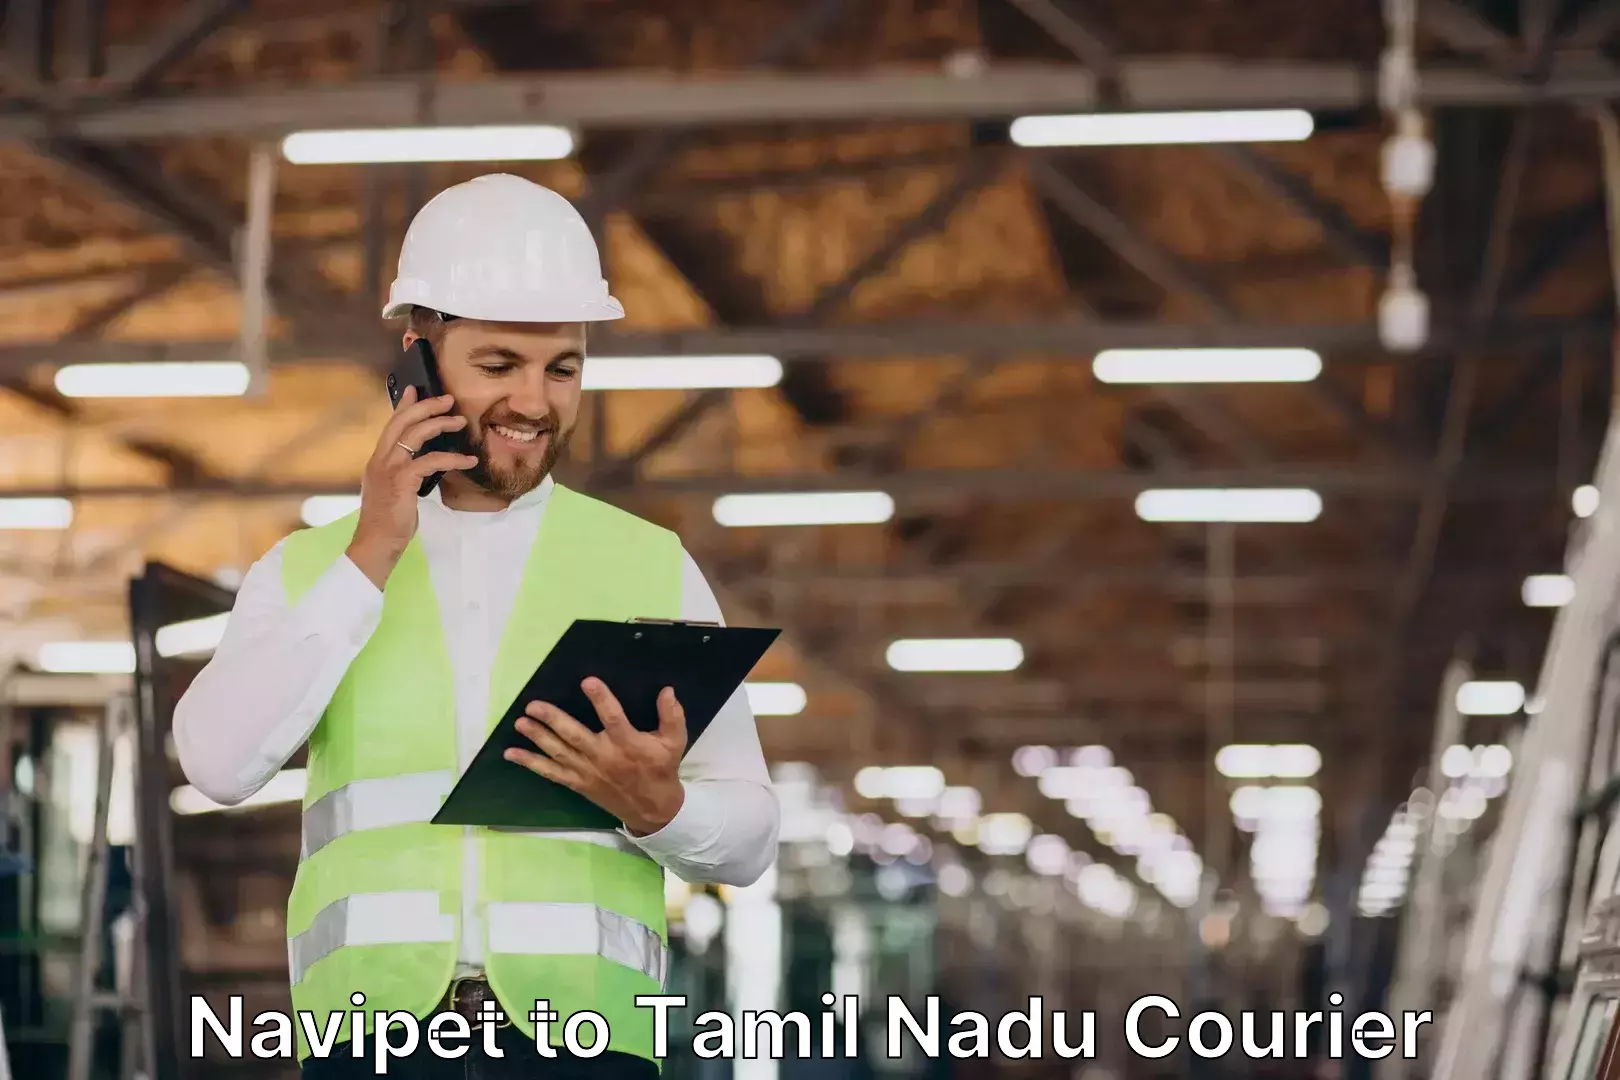 Hassle-free luggage shipping Navipet to Coimbatore